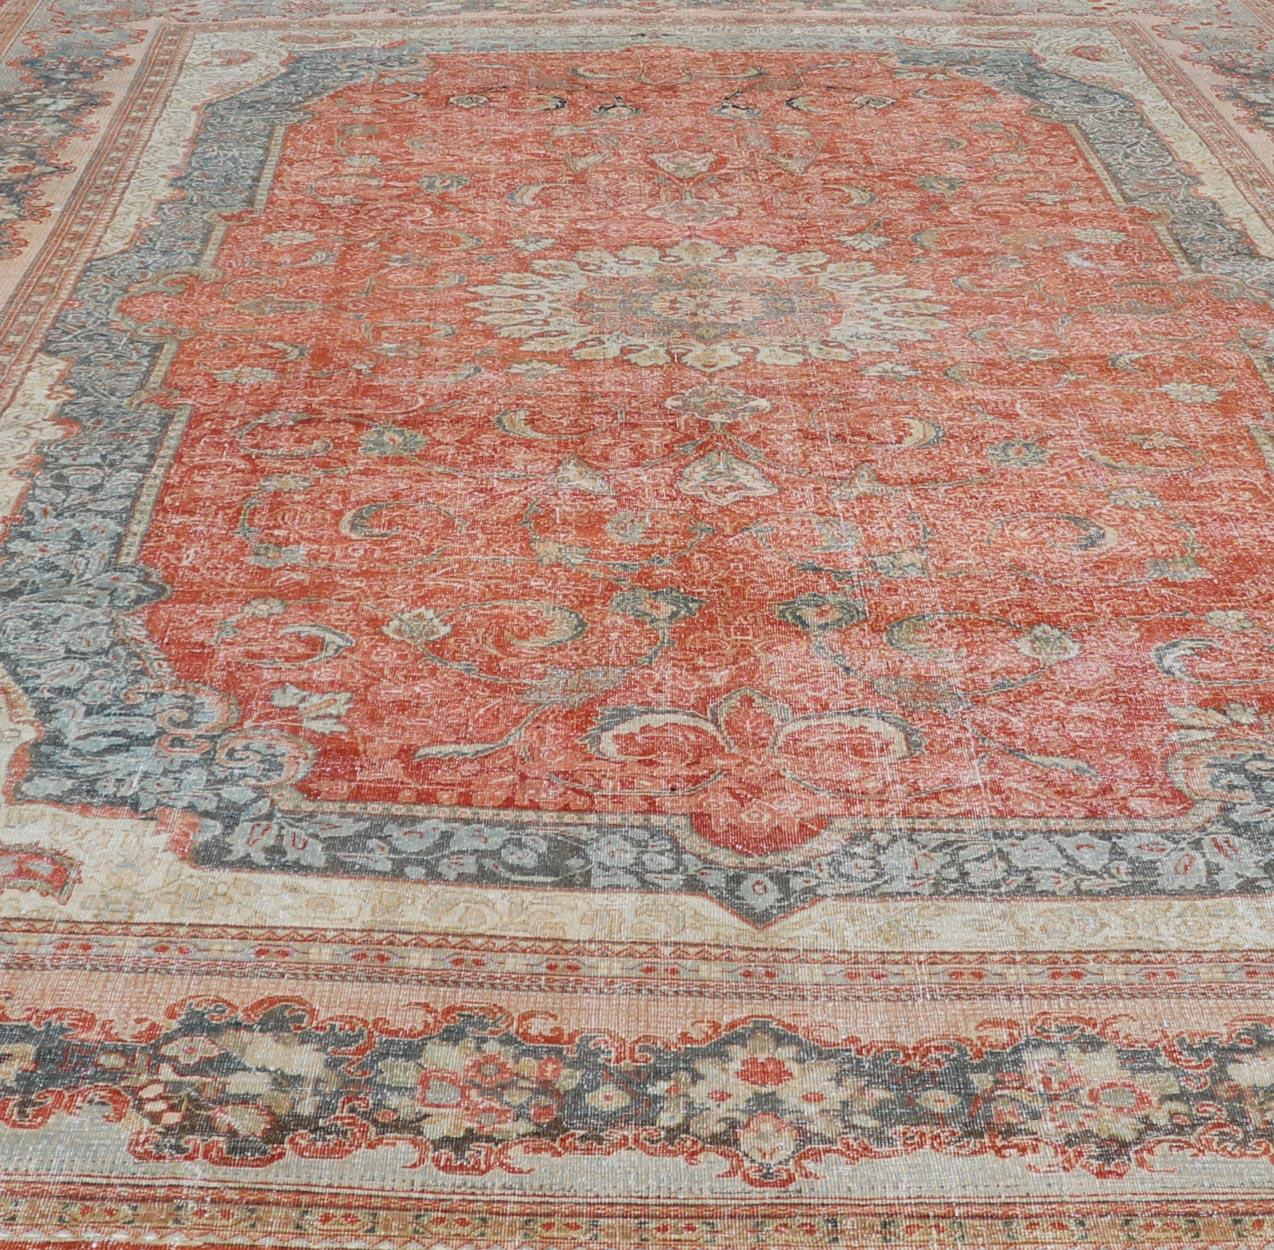 Large Antique Persian Mahal Rug with Central Medallion and Regal Design For Sale 4